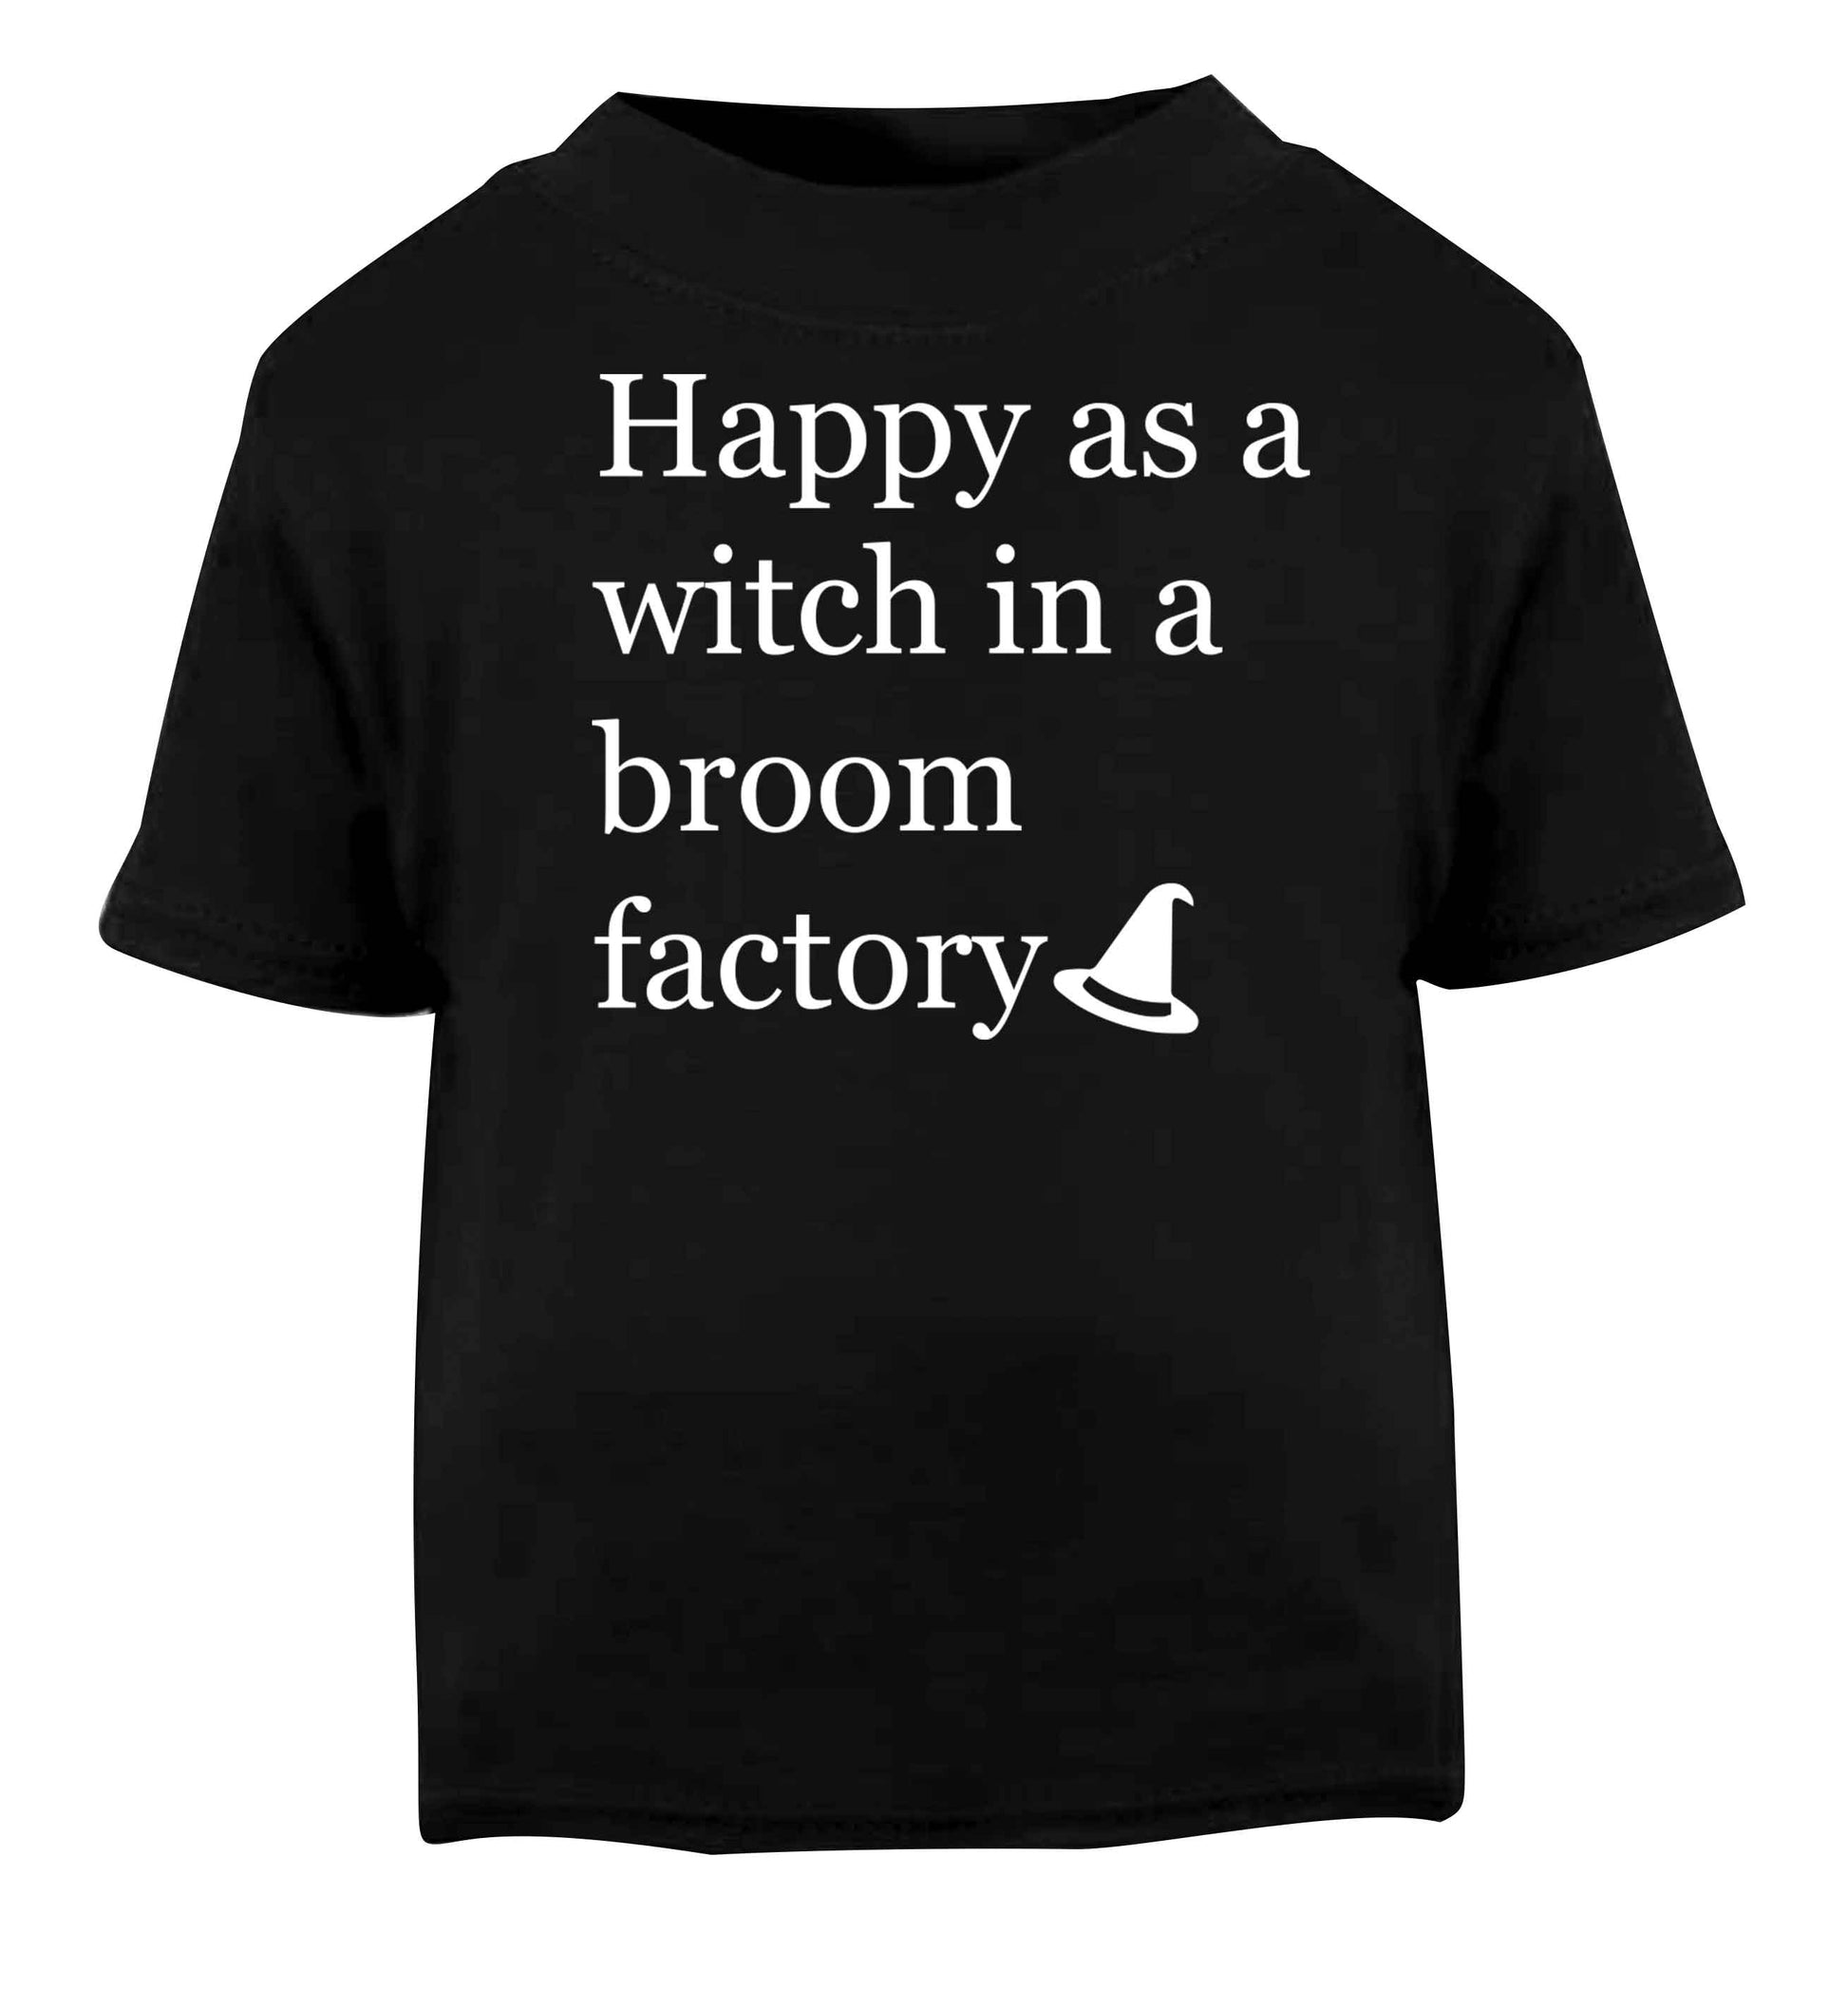 Happy as a witch in a broom factory Black baby toddler Tshirt 2 years